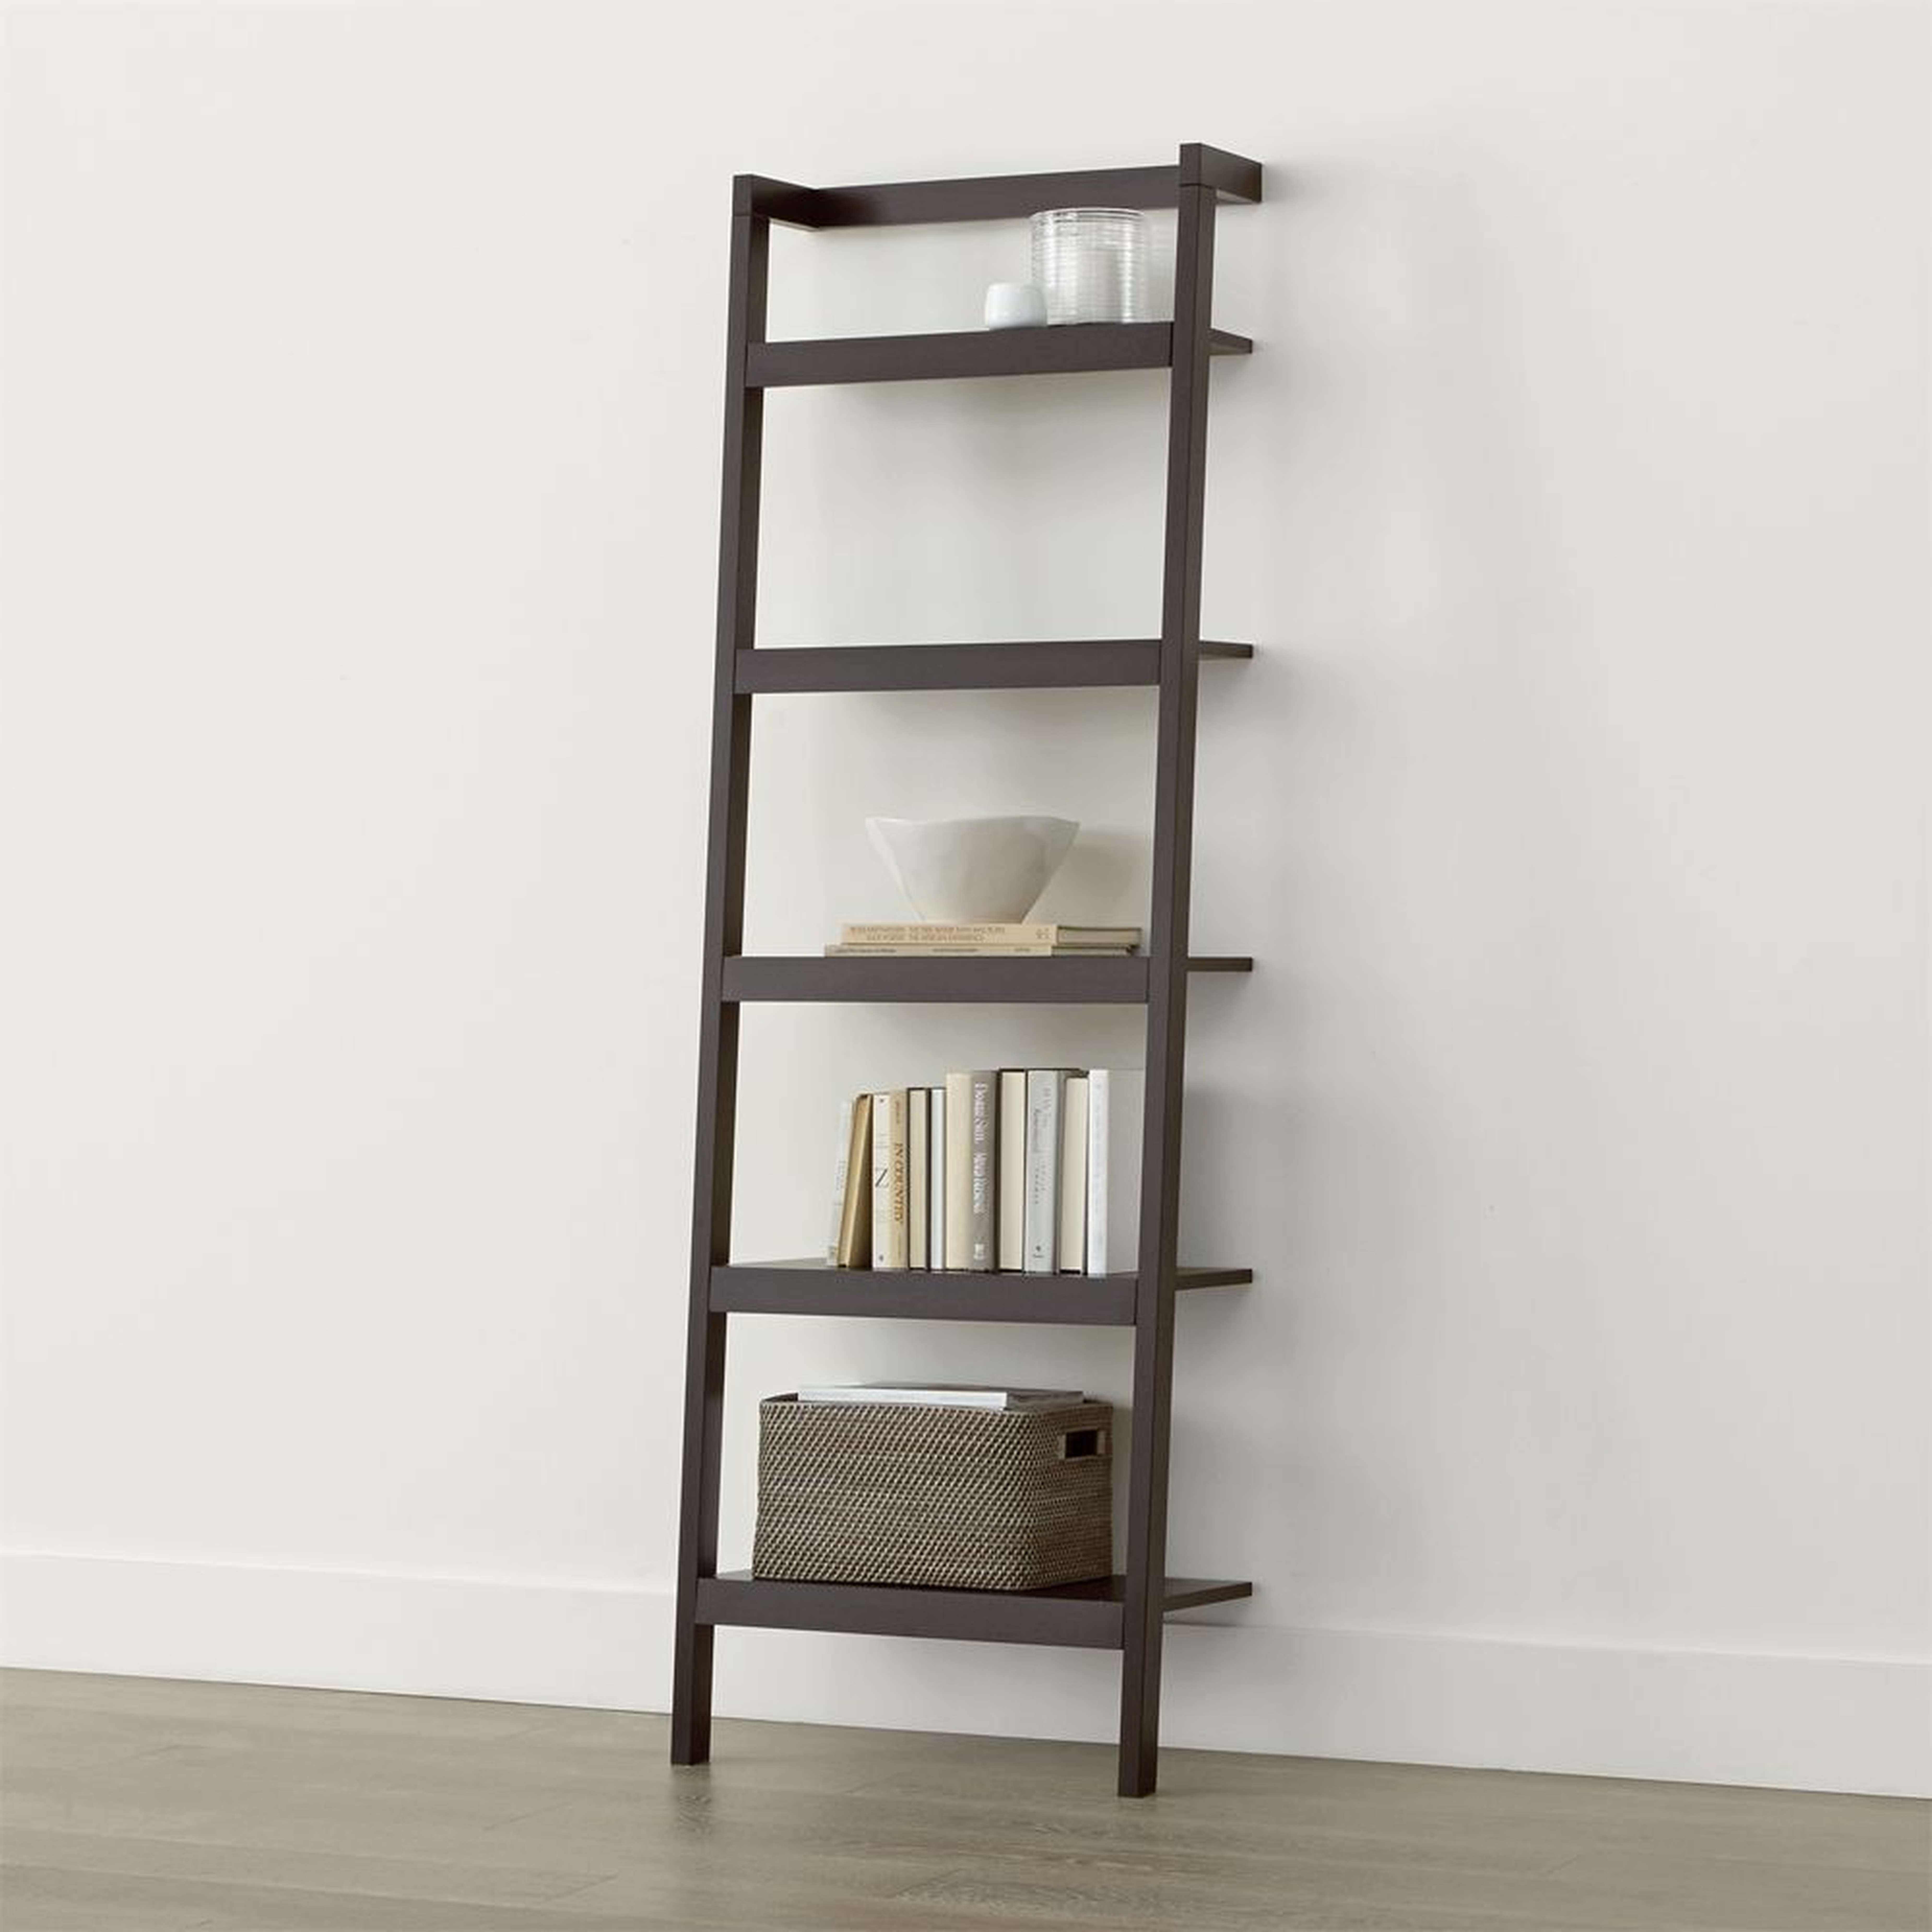 Sawyer Mocha Leaning 24.5" Bookcase - Crate and Barrel